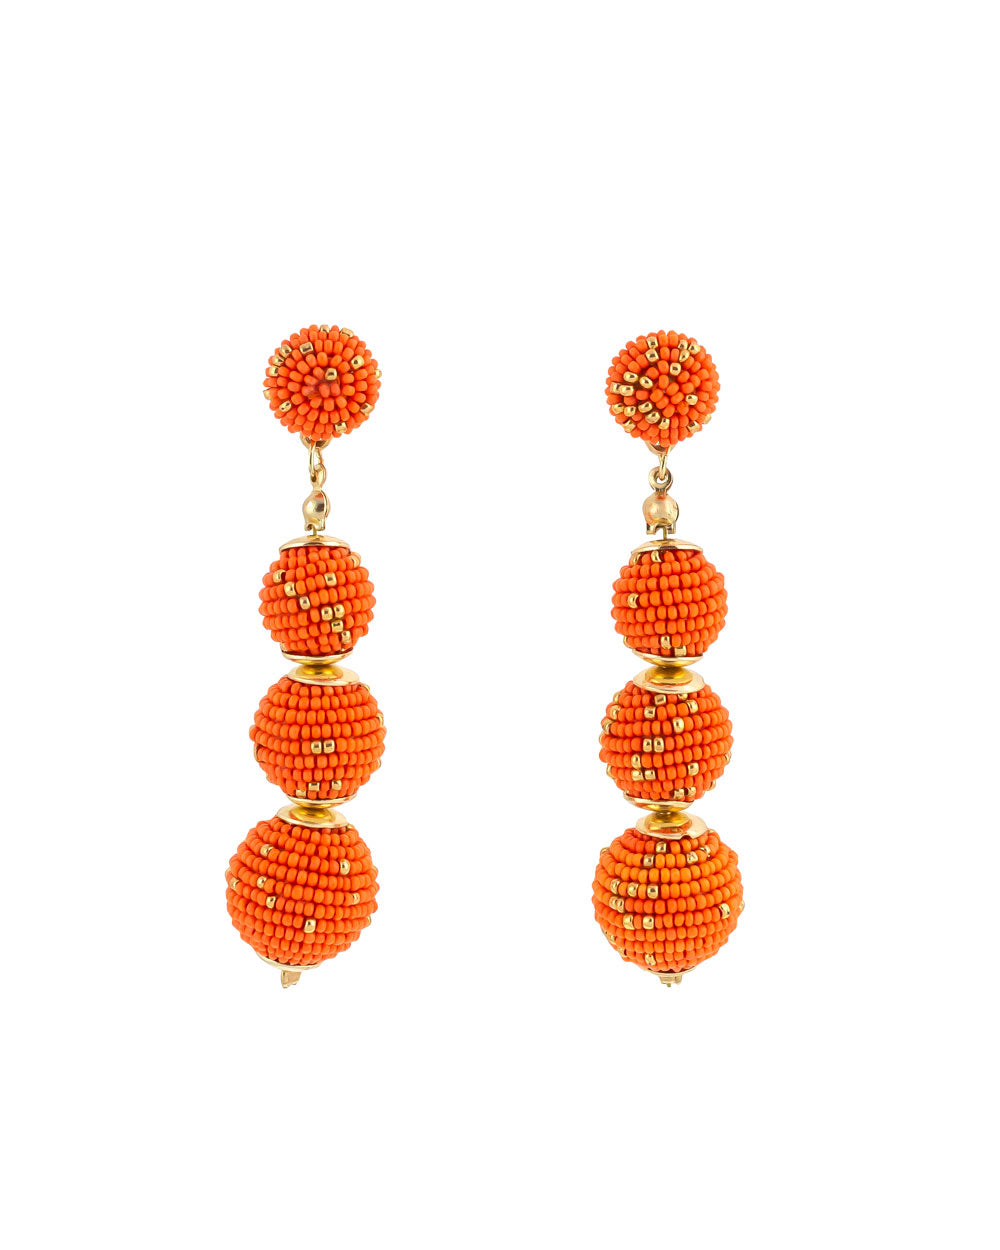 Dauplaise Jewelry - The Breakers Gold Earrings